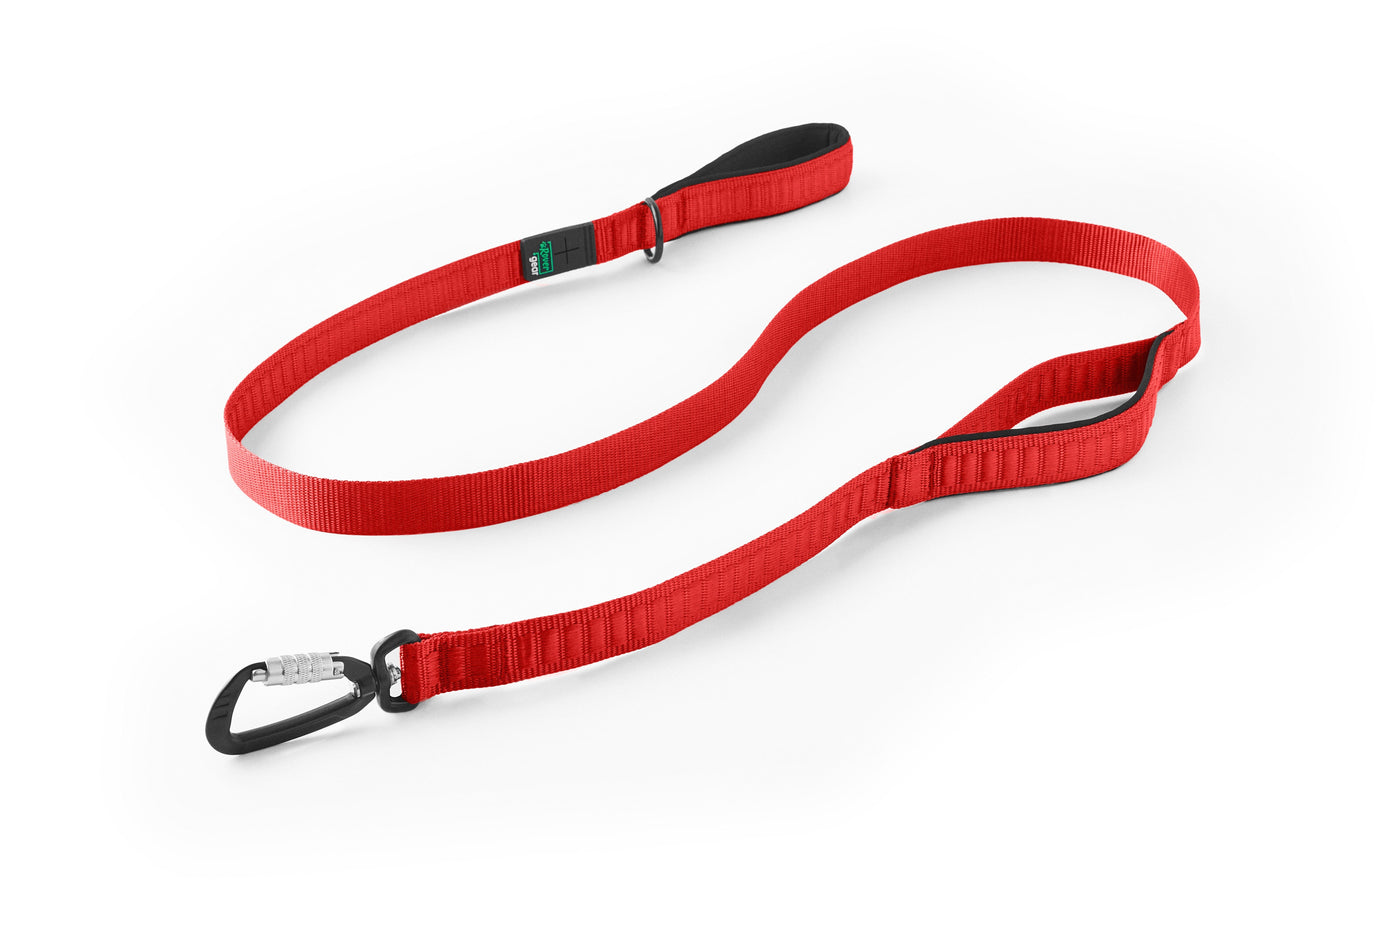 Rover Gear Essential Dog Walking Leash Leash Rover 6 ft Red 